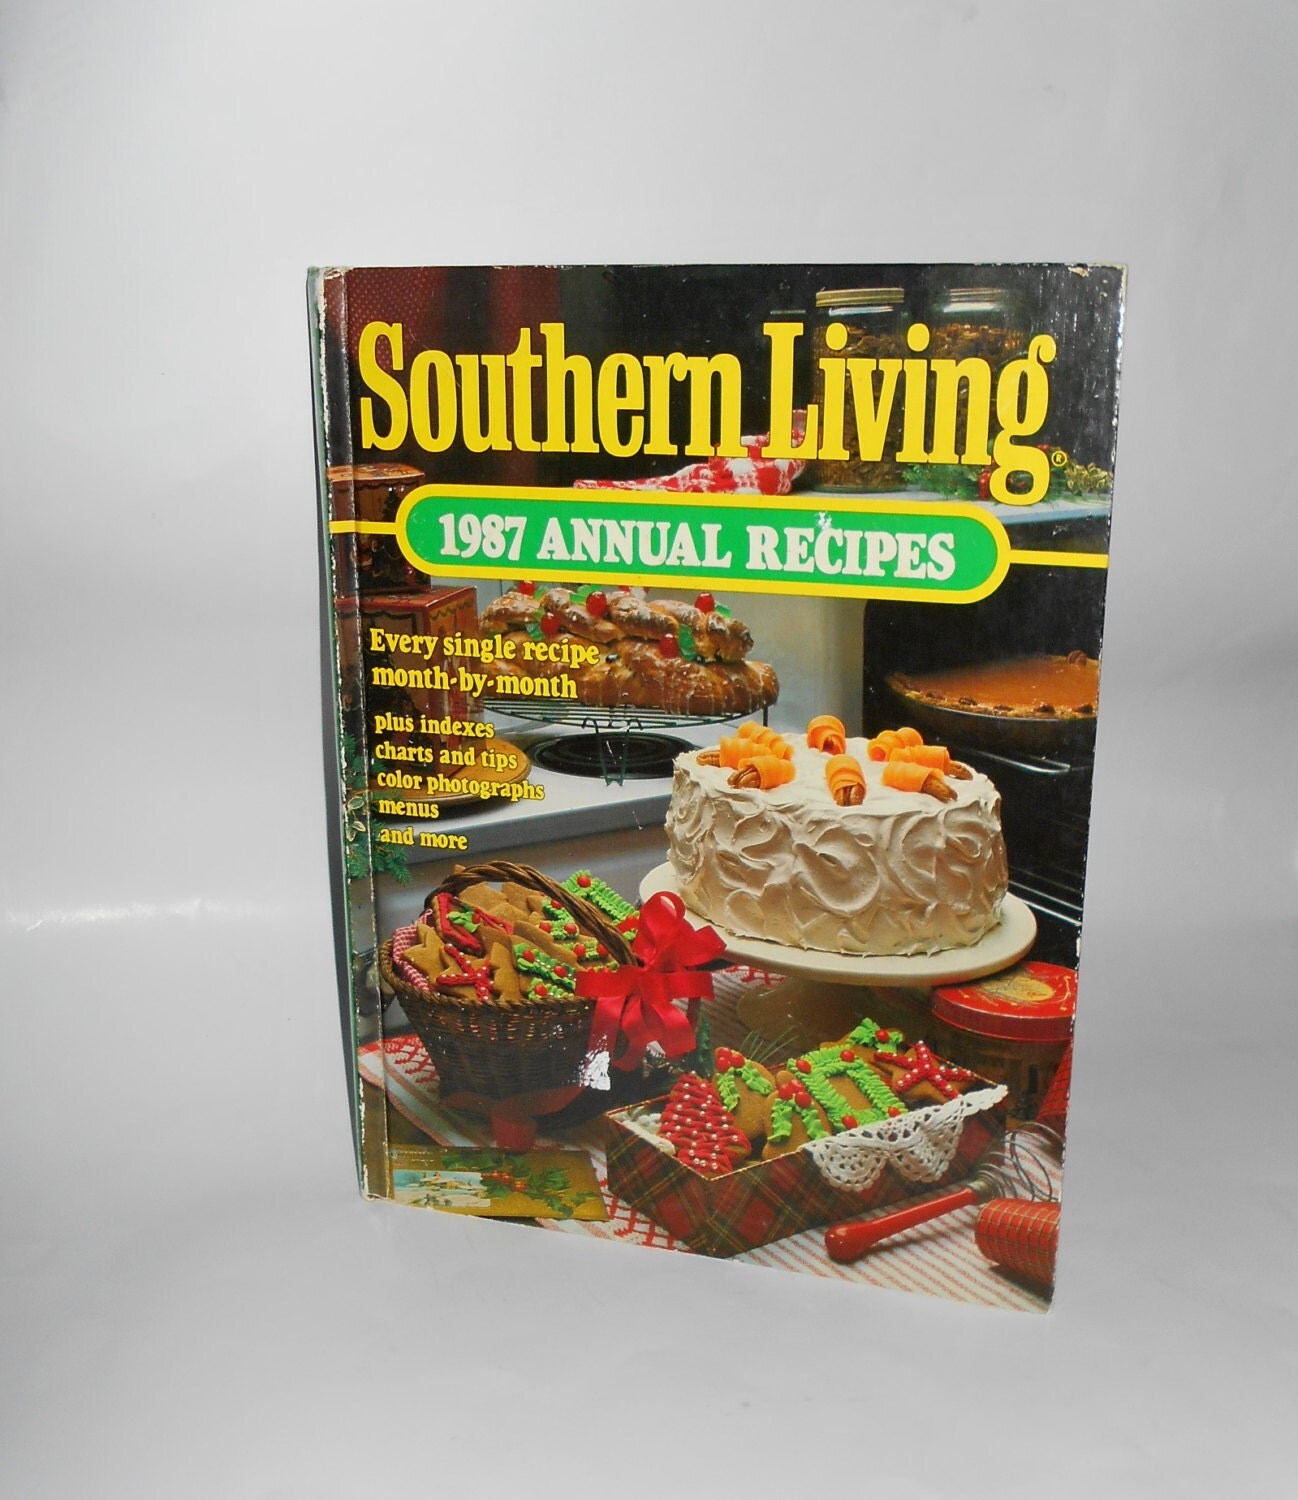 Spring Sale 1987 Cookbook Southern Living 1987 Annual Recipes